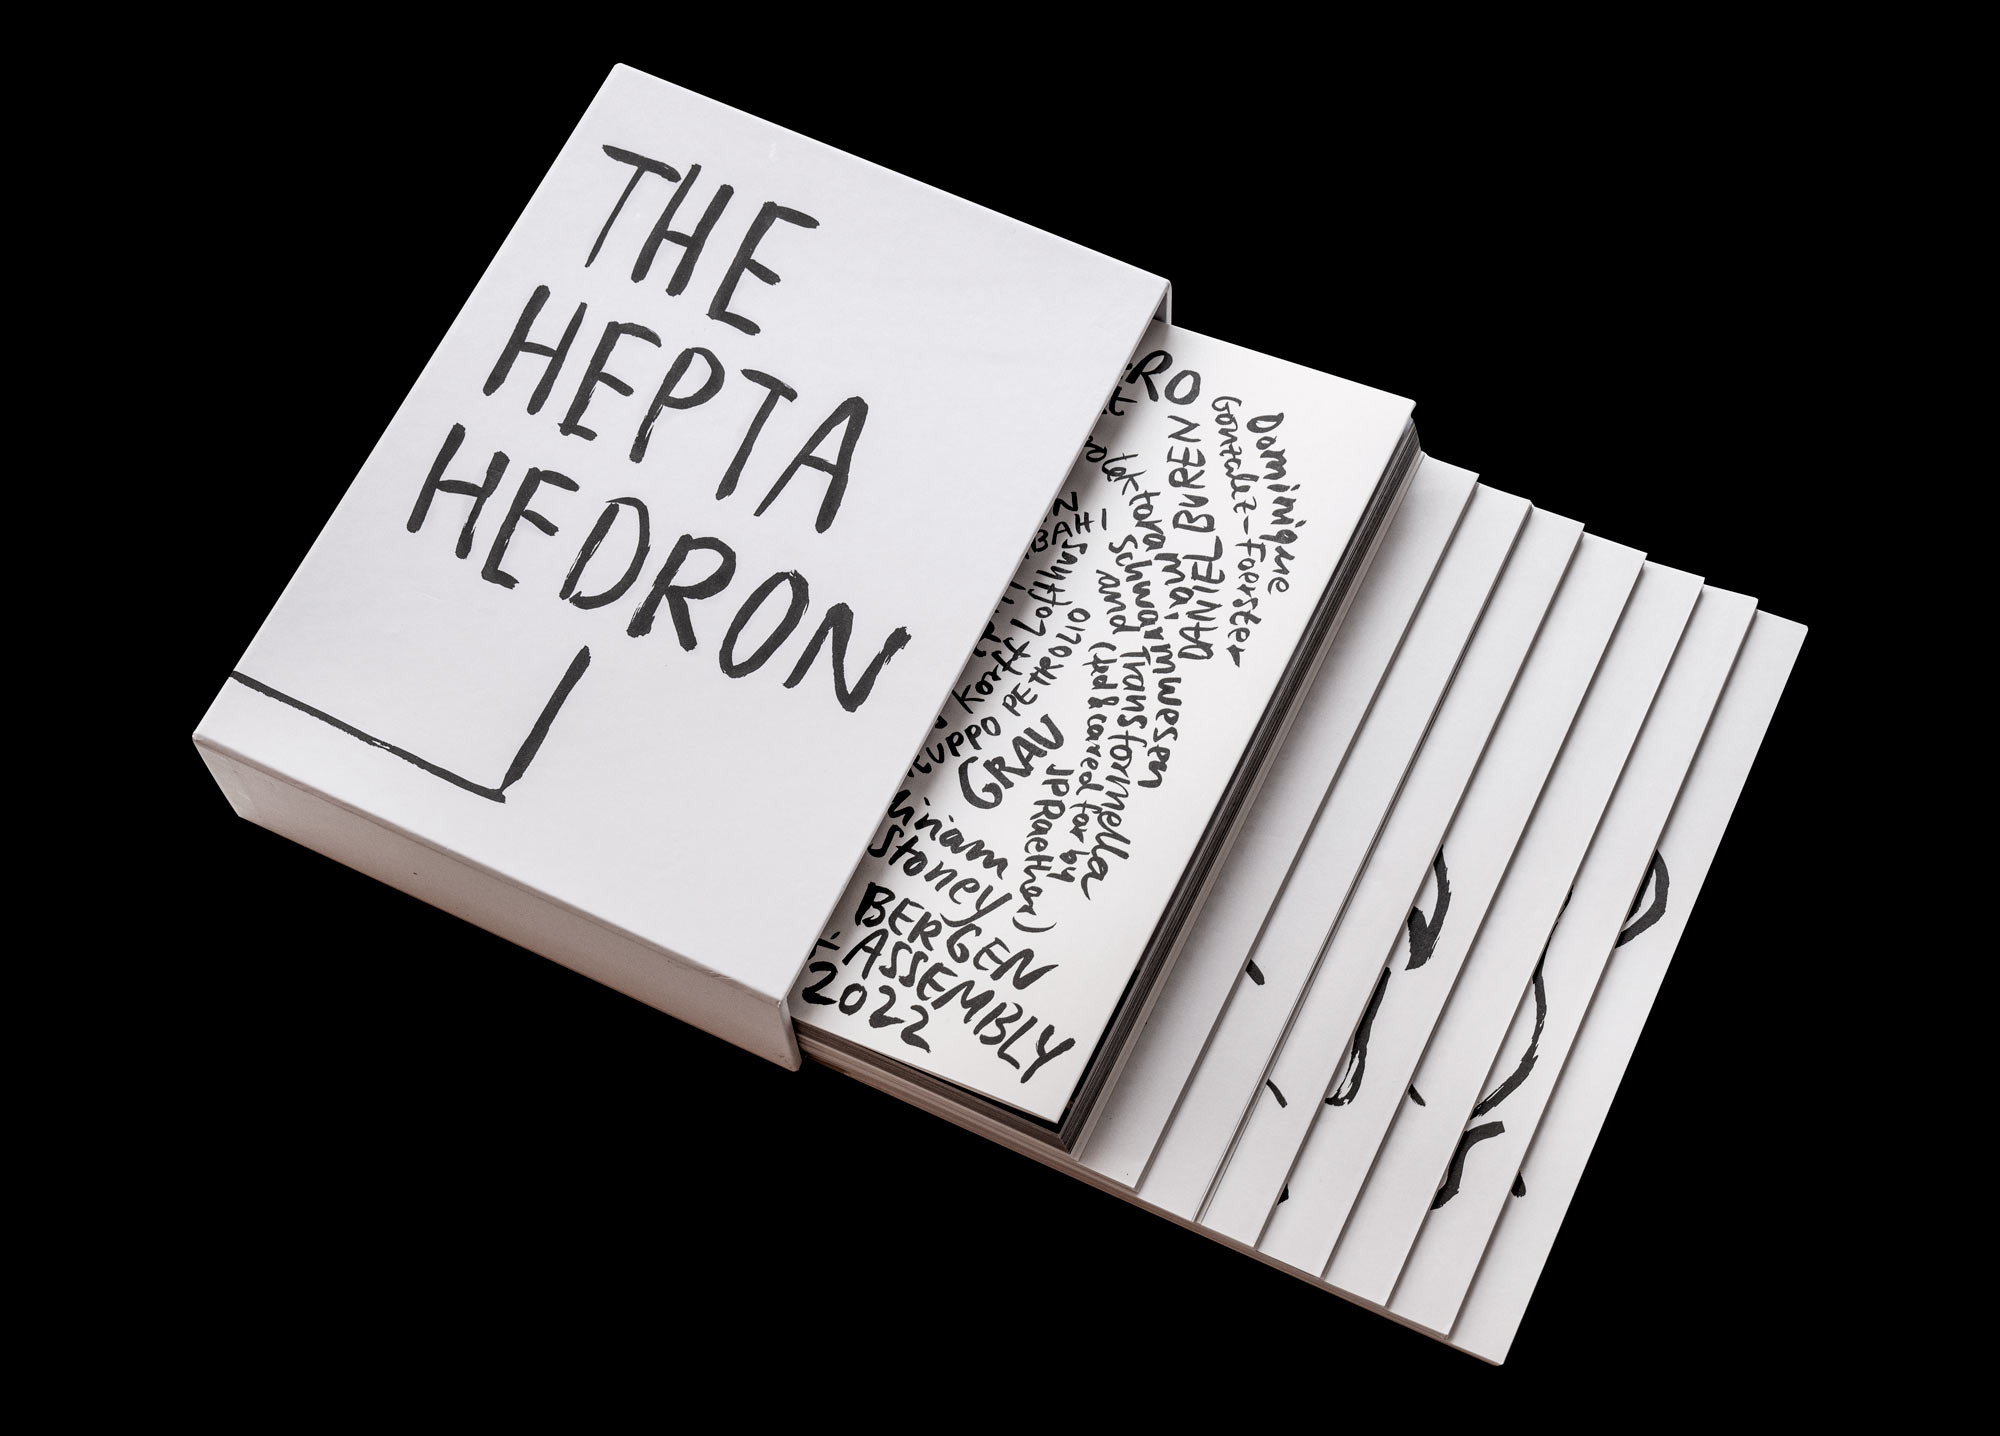 The Heptahedron. Complete Series of Side Magazine 